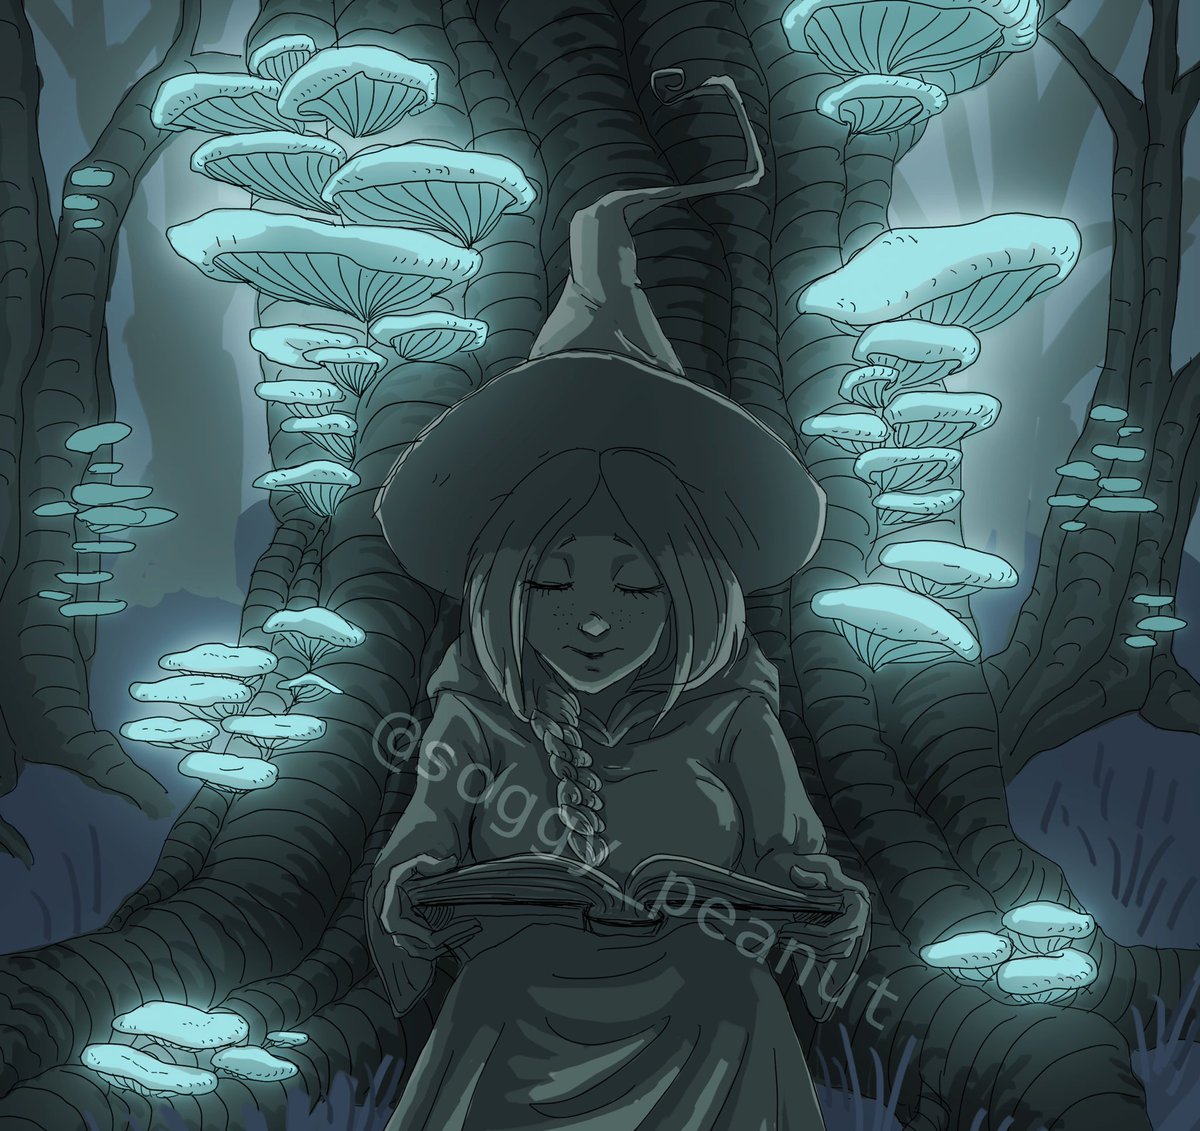 Day 28 - mushroom 
#Witchtober2020 #inktober2020 #glow #glowingmushrooms #forest #night #booklovers #witch #reading